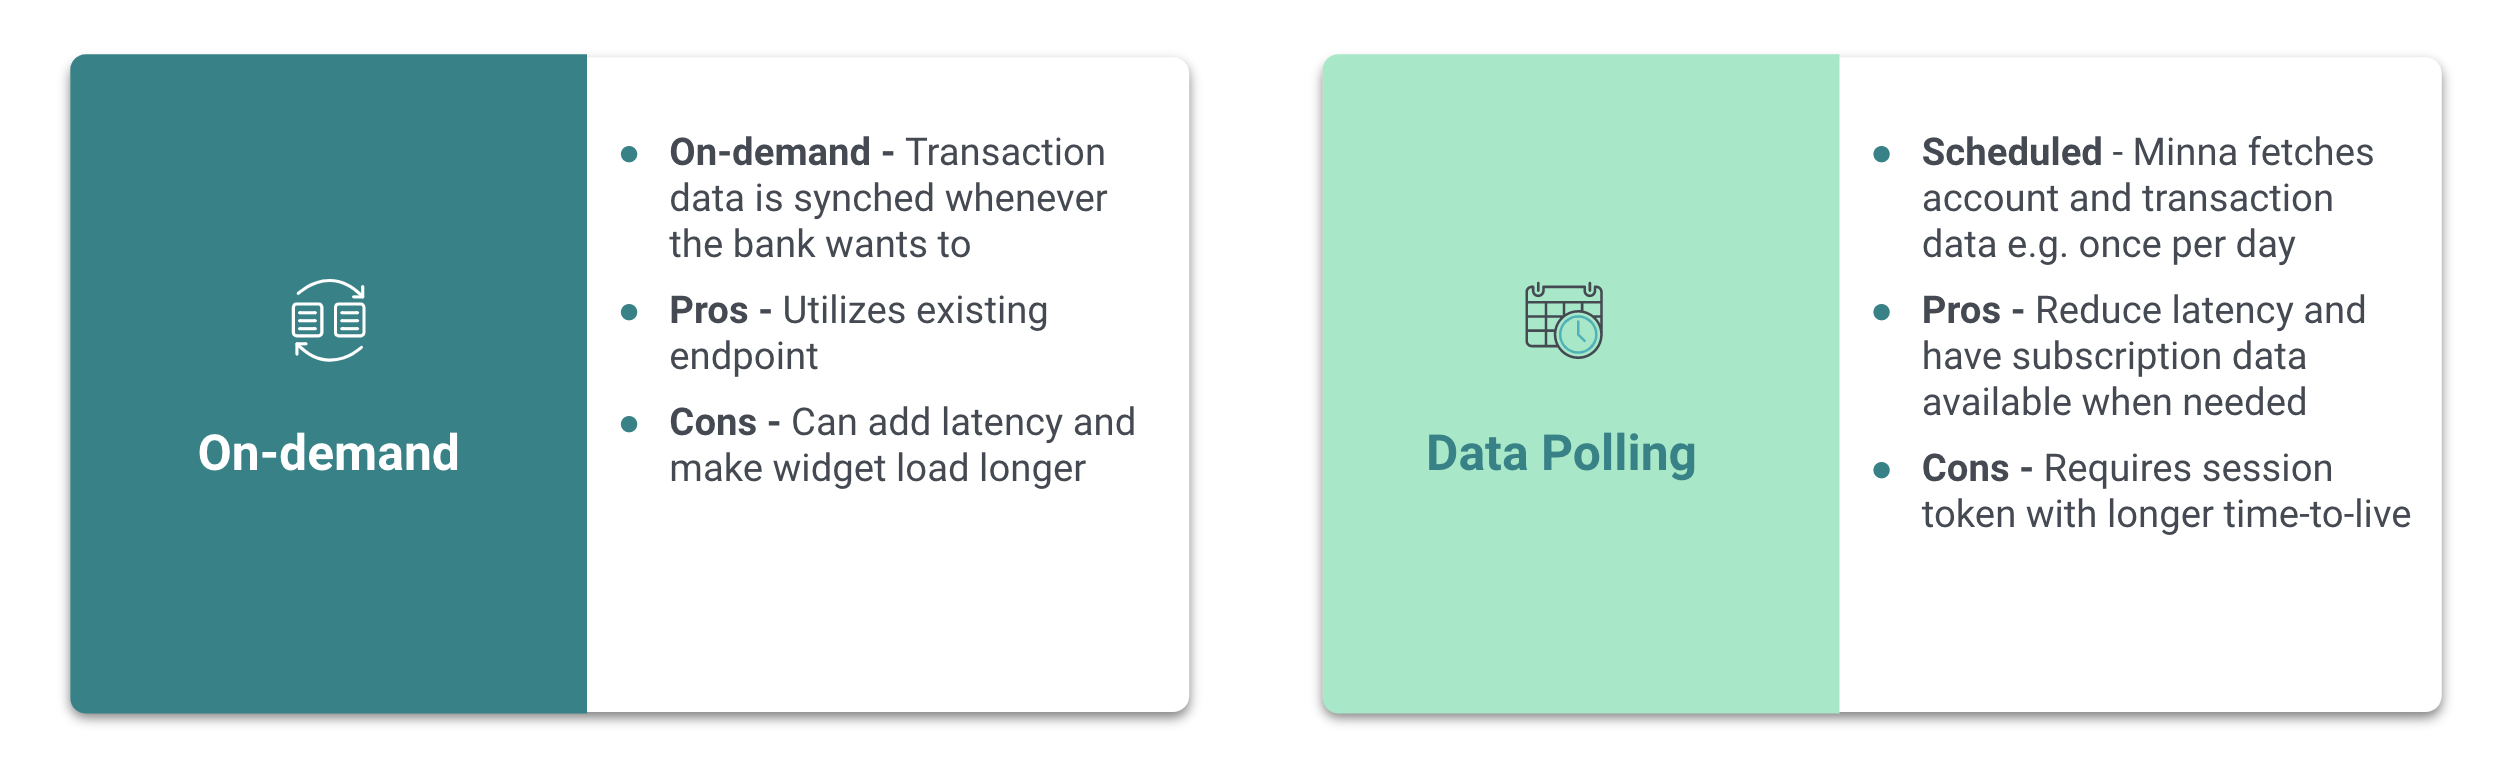 Pros and cons for sharing data on-demand or with data polling